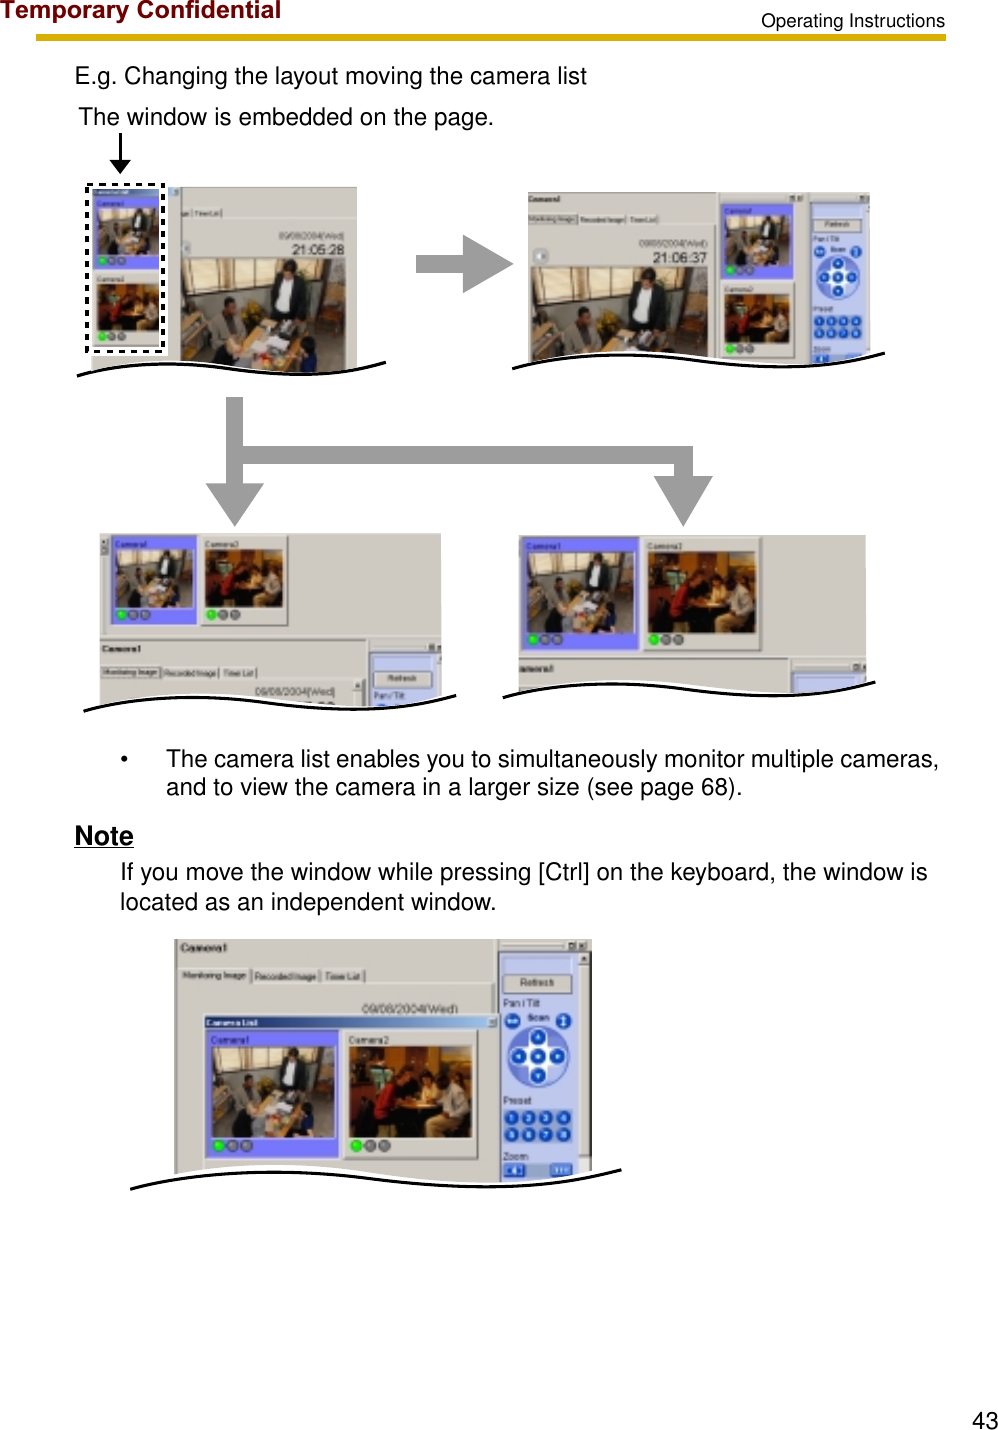 Operating Instructions43E.g. Changing the layout moving the camera list• The camera list enables you to simultaneously monitor multiple cameras, and to view the camera in a larger size (see page 68).NoteIf you move the window while pressing [Ctrl] on the keyboard, the window is located as an independent window.The window is embedded on the page.Temporary Confidential